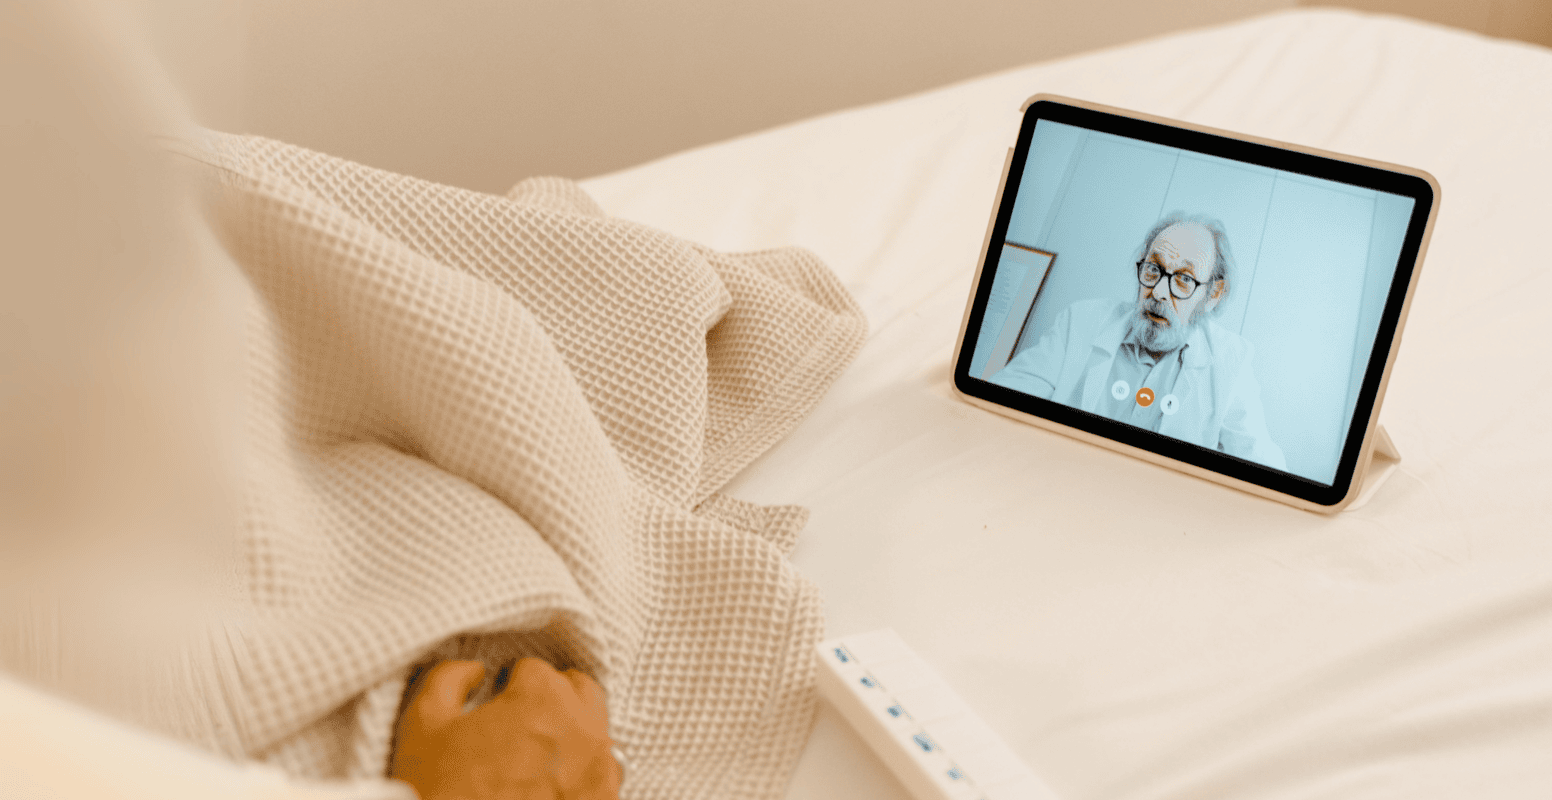 How Telehealth Decreases Cost and Improves Health Outcomes